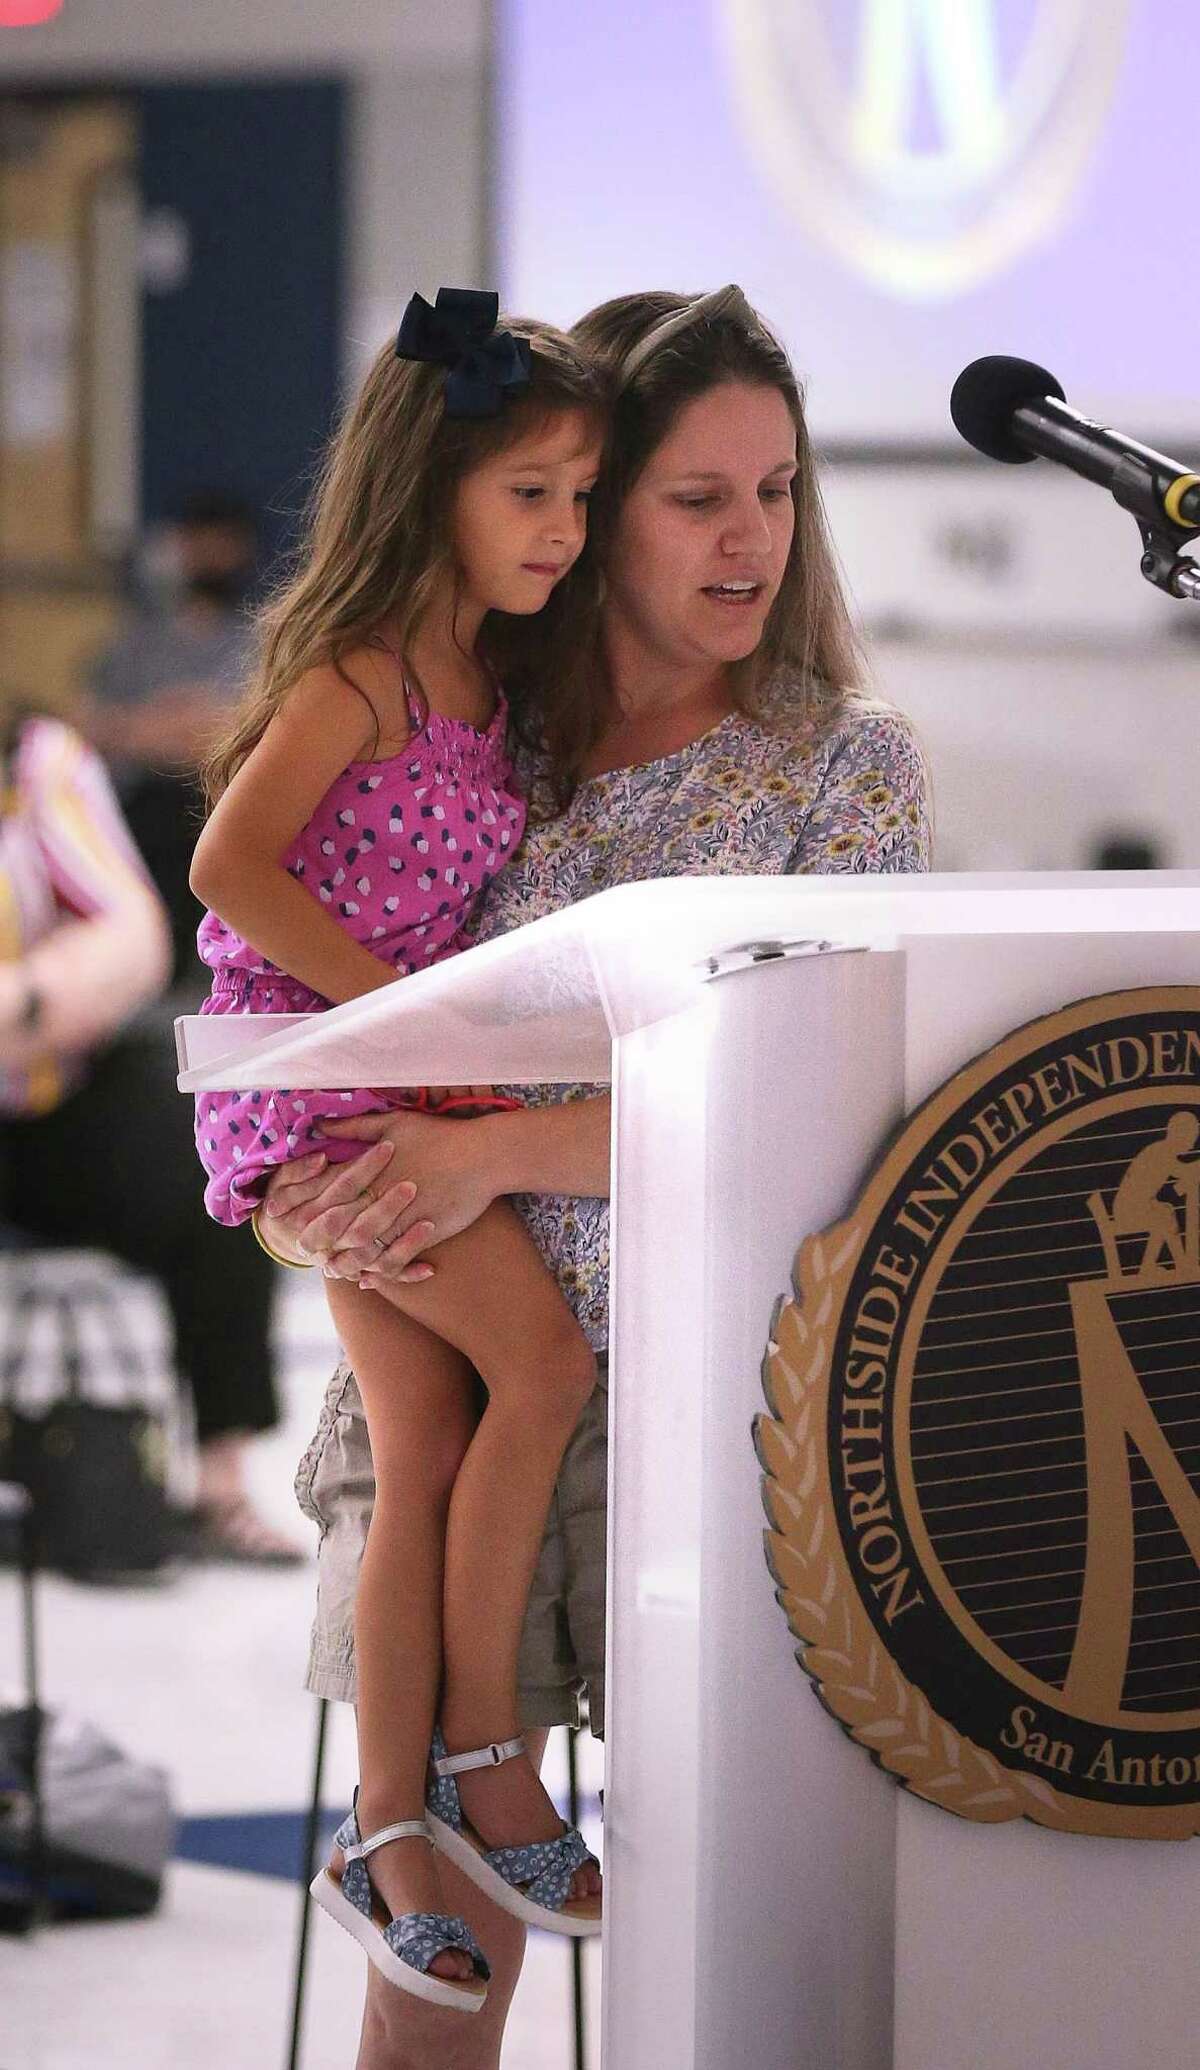 At Northside ISD’s board meeting, Lesley Casias reads with her daughter Irelynn, 5, the letter she wrote last night on why they should not mandate wearing a mask.